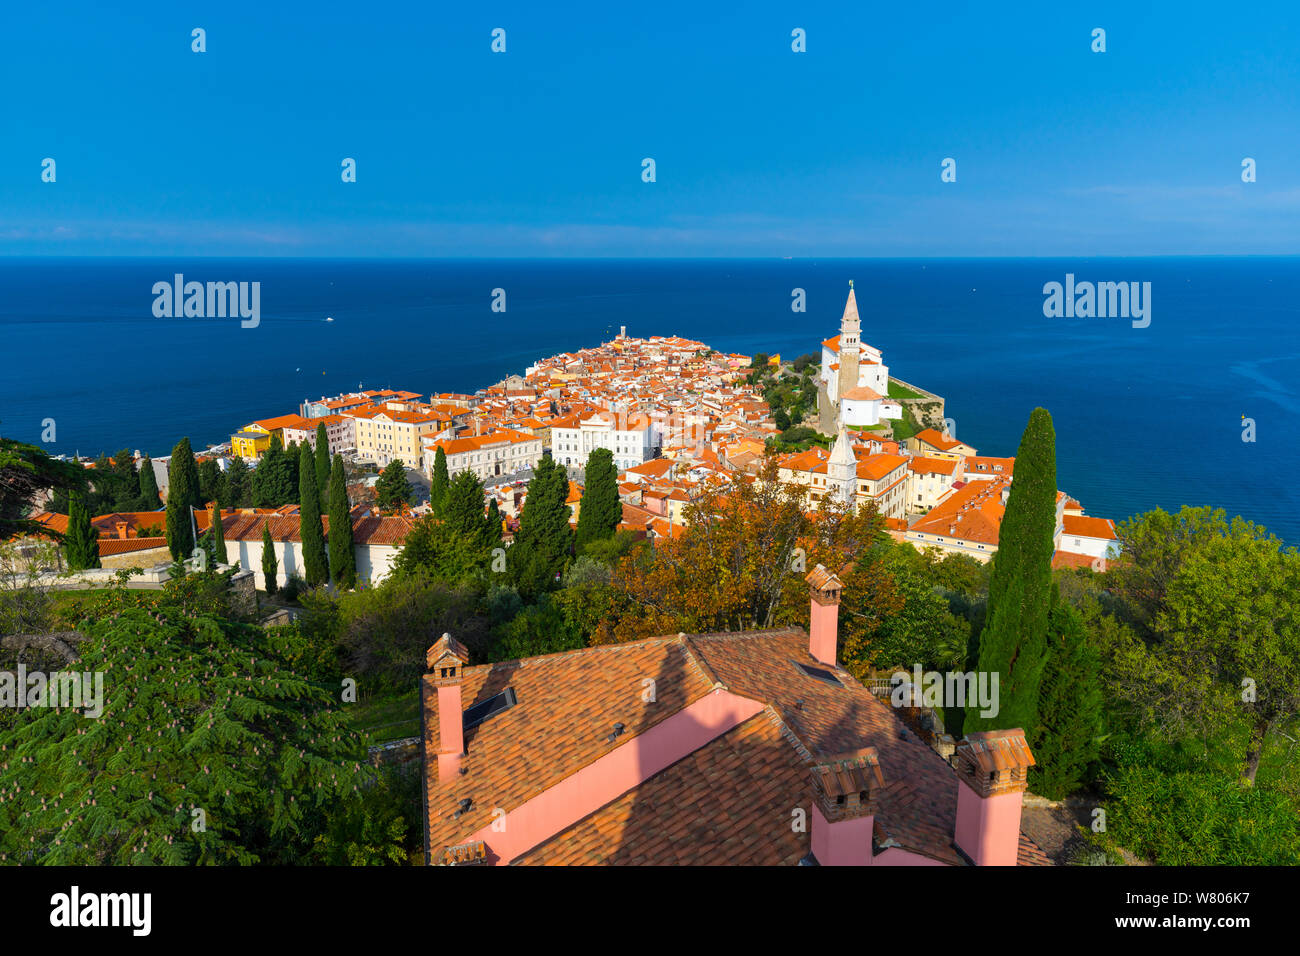 Landscape of the town of Piran and the coast, Slovenia, September 2014. Stock Photo